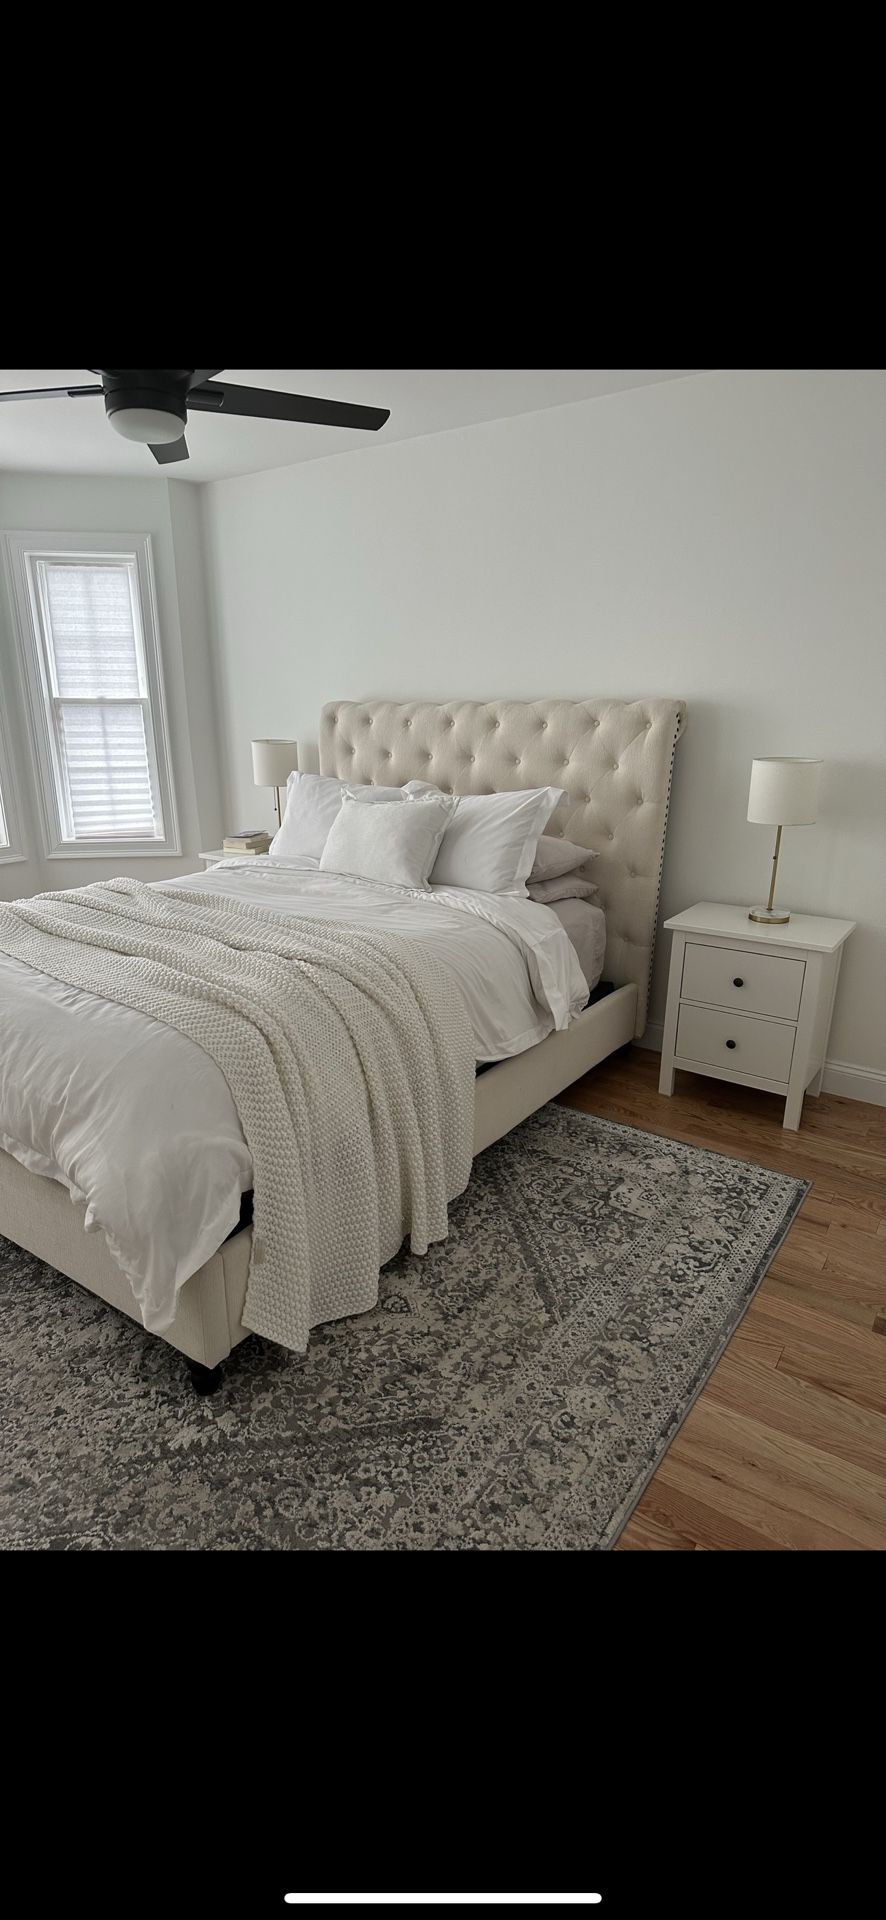 Beige Tufted Headboard And Bed frame